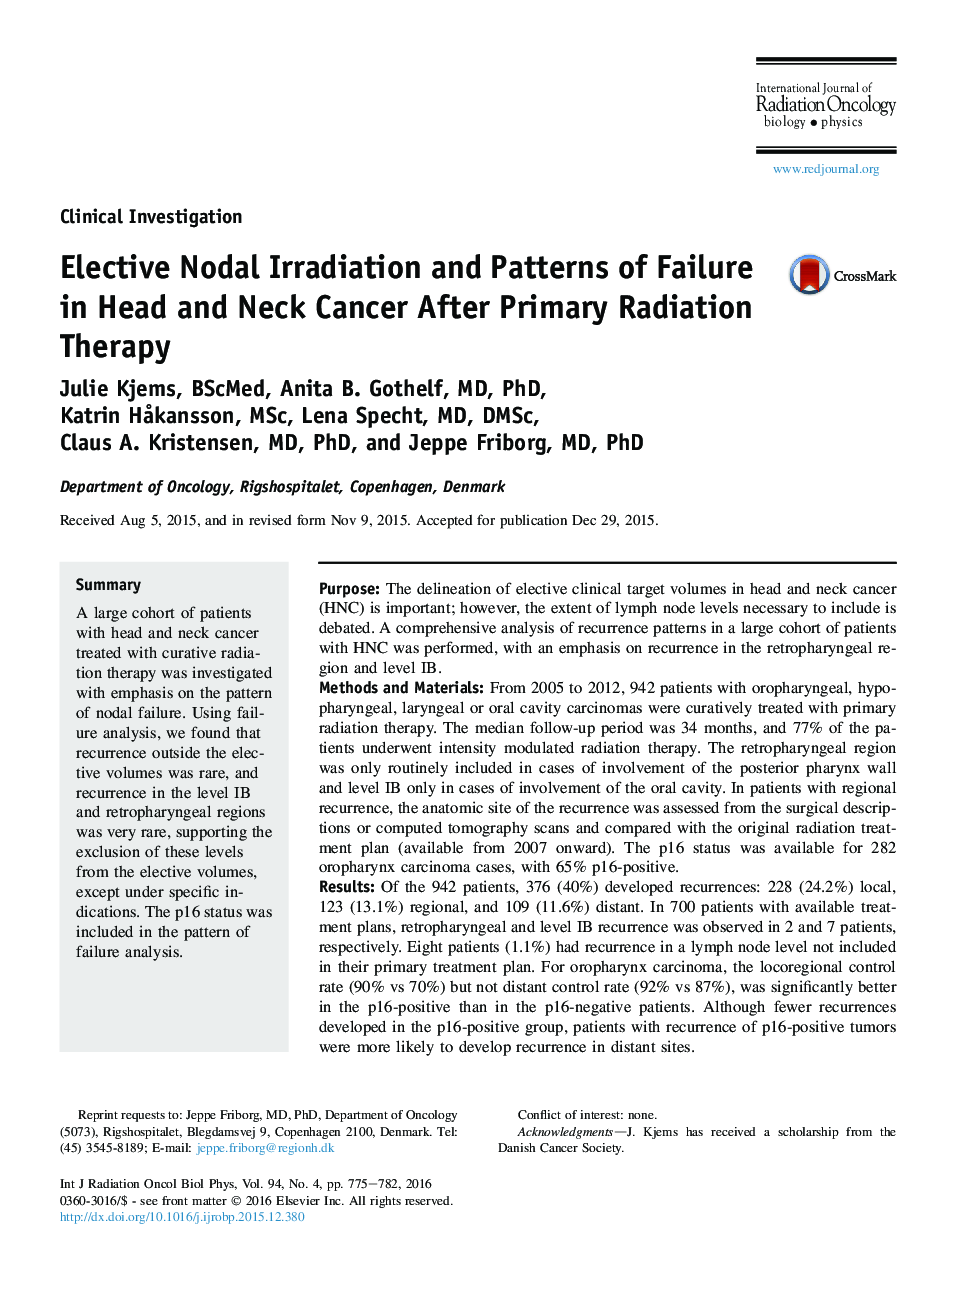 Elective Nodal Irradiation and Patterns of Failure in Head and Neck Cancer After Primary Radiation Therapy